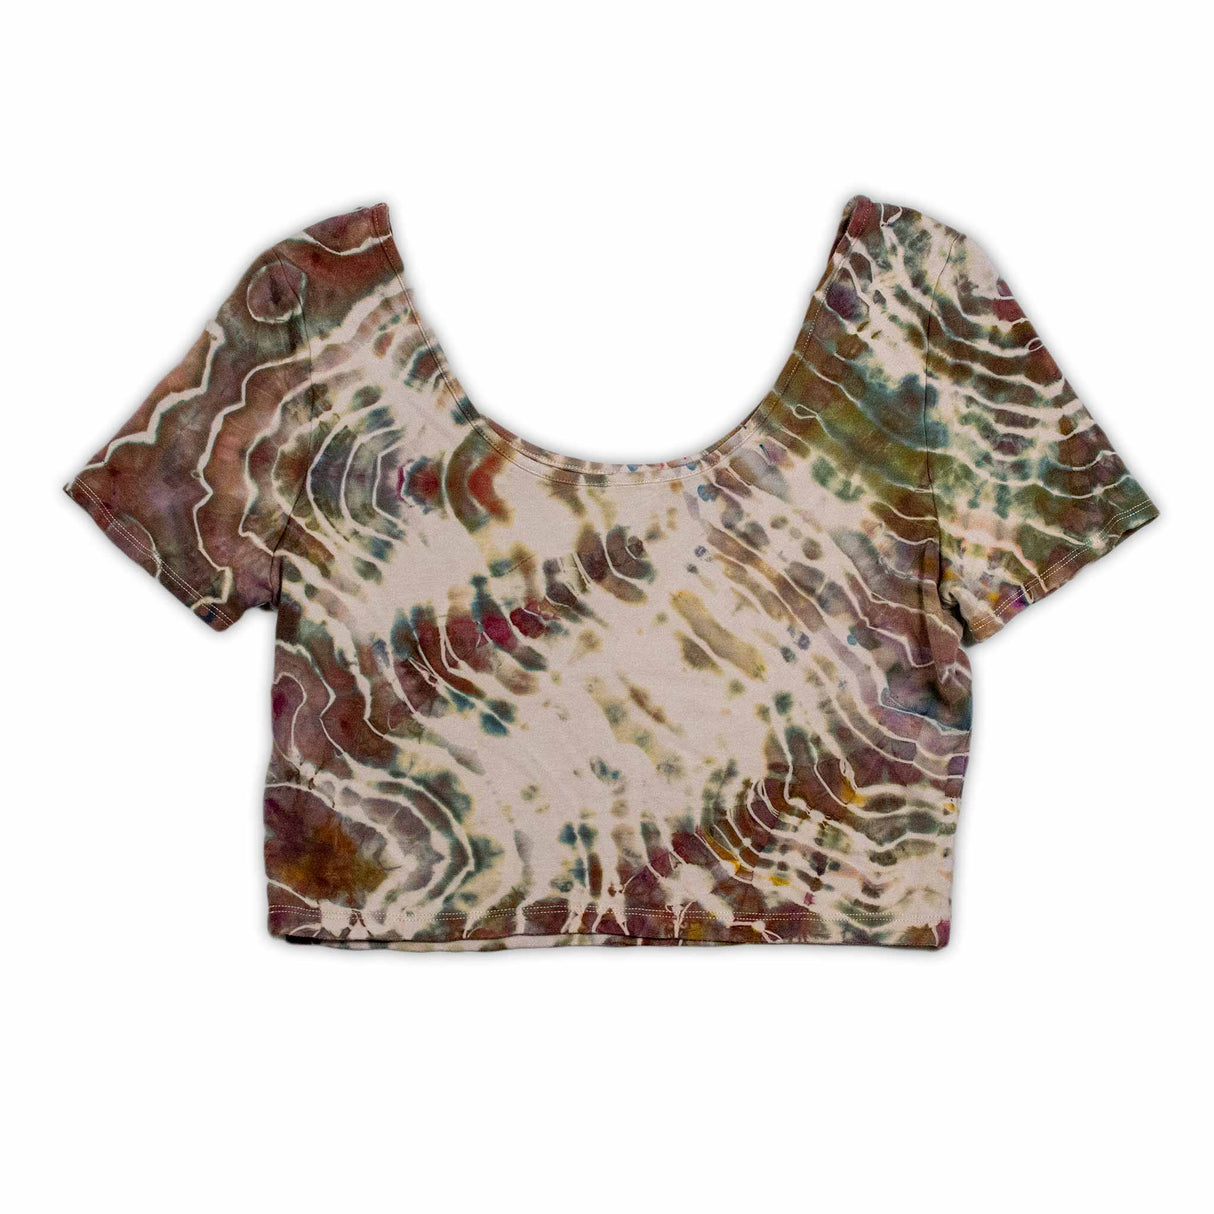 A casual, ice-dyed scoop neck top showcasing a hypnotic array of swirls and lines in colors inspired by the earth, including dark green, terracotta, and sand.